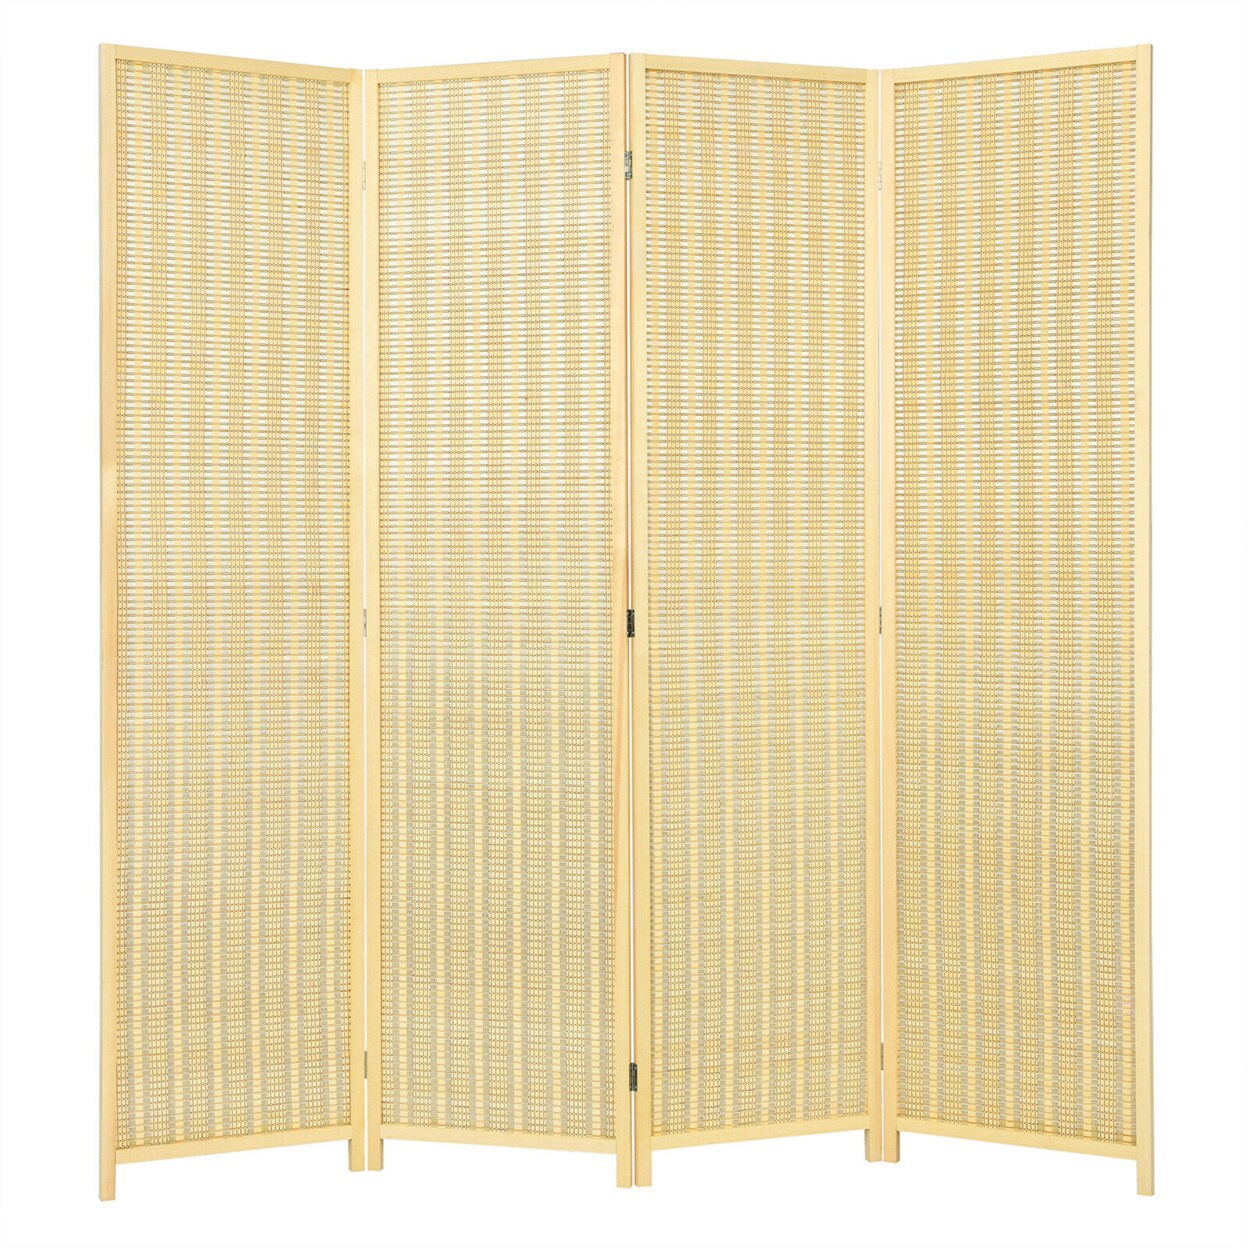 Gymax 4 Panel Room Divider Screen Portable Folding 6 ft Partition Screen